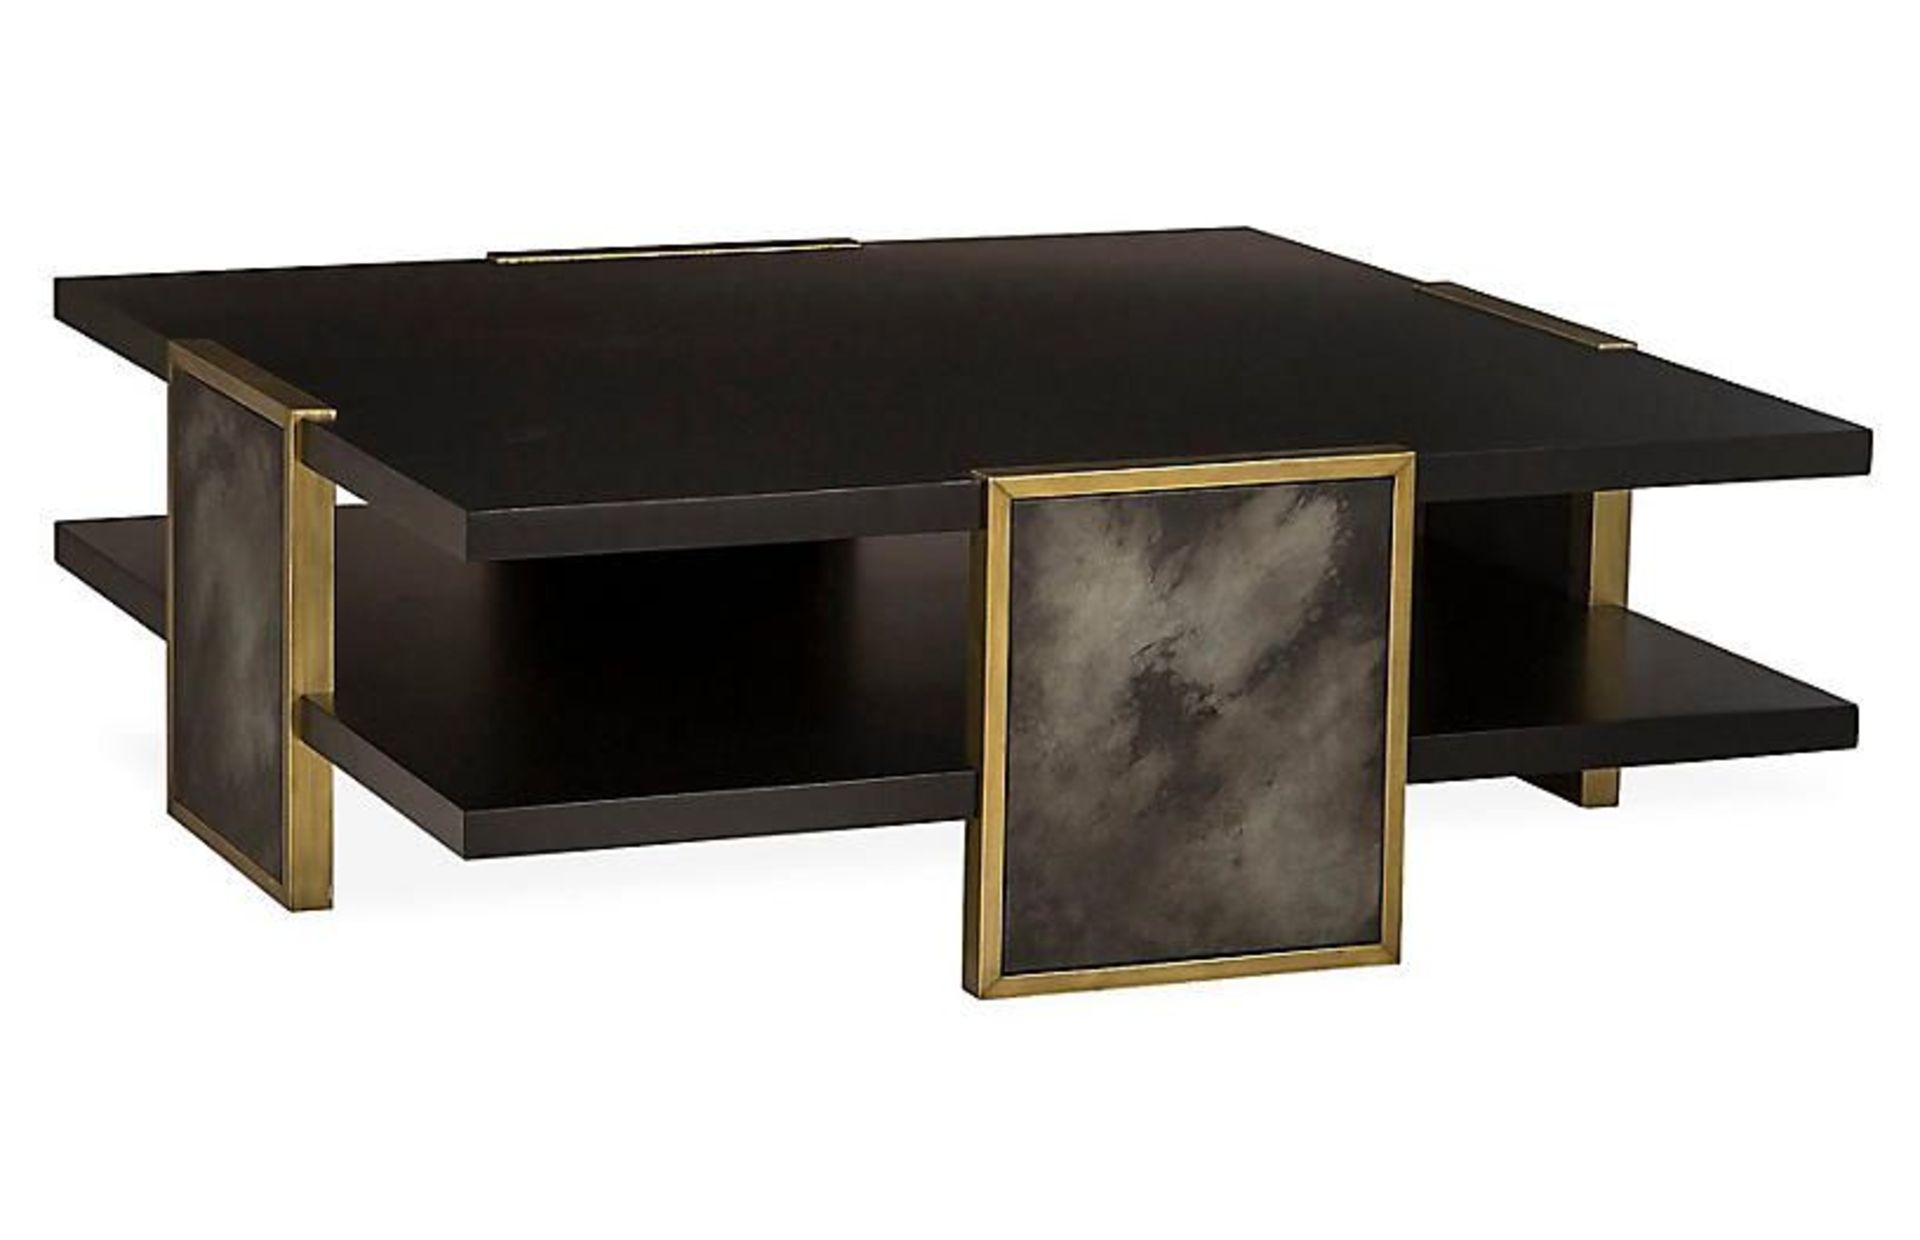 Knox Coffee Table Thoughtfully Designed With Two Stacked Shelves And Textural Leather Like Legs - Image 2 of 2